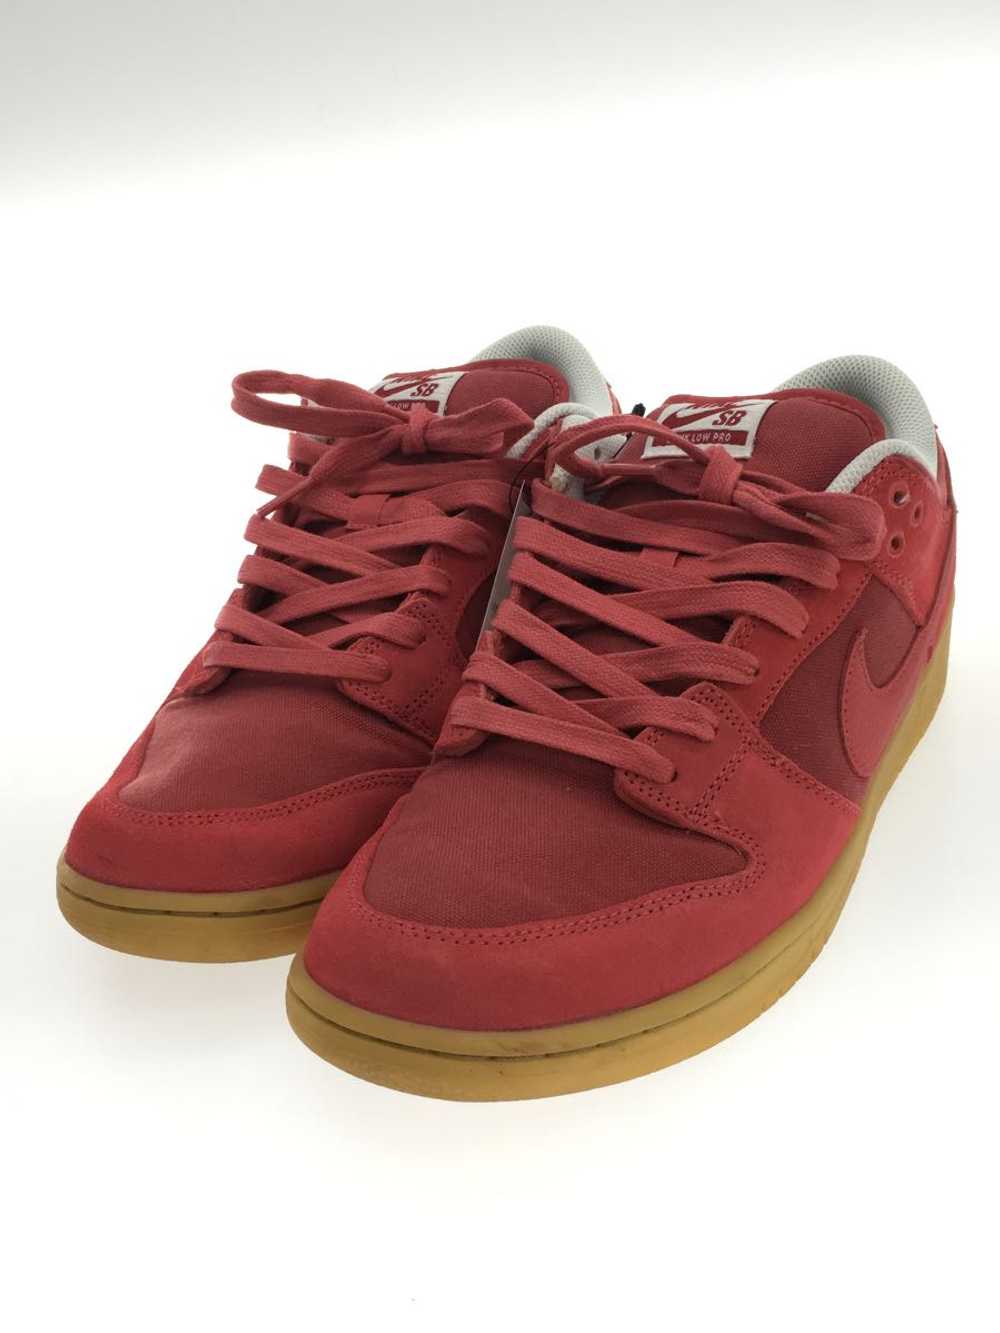 Nike Low Cut Sneakers/Red/Dv5429-600 Shoes US11 J… - image 2